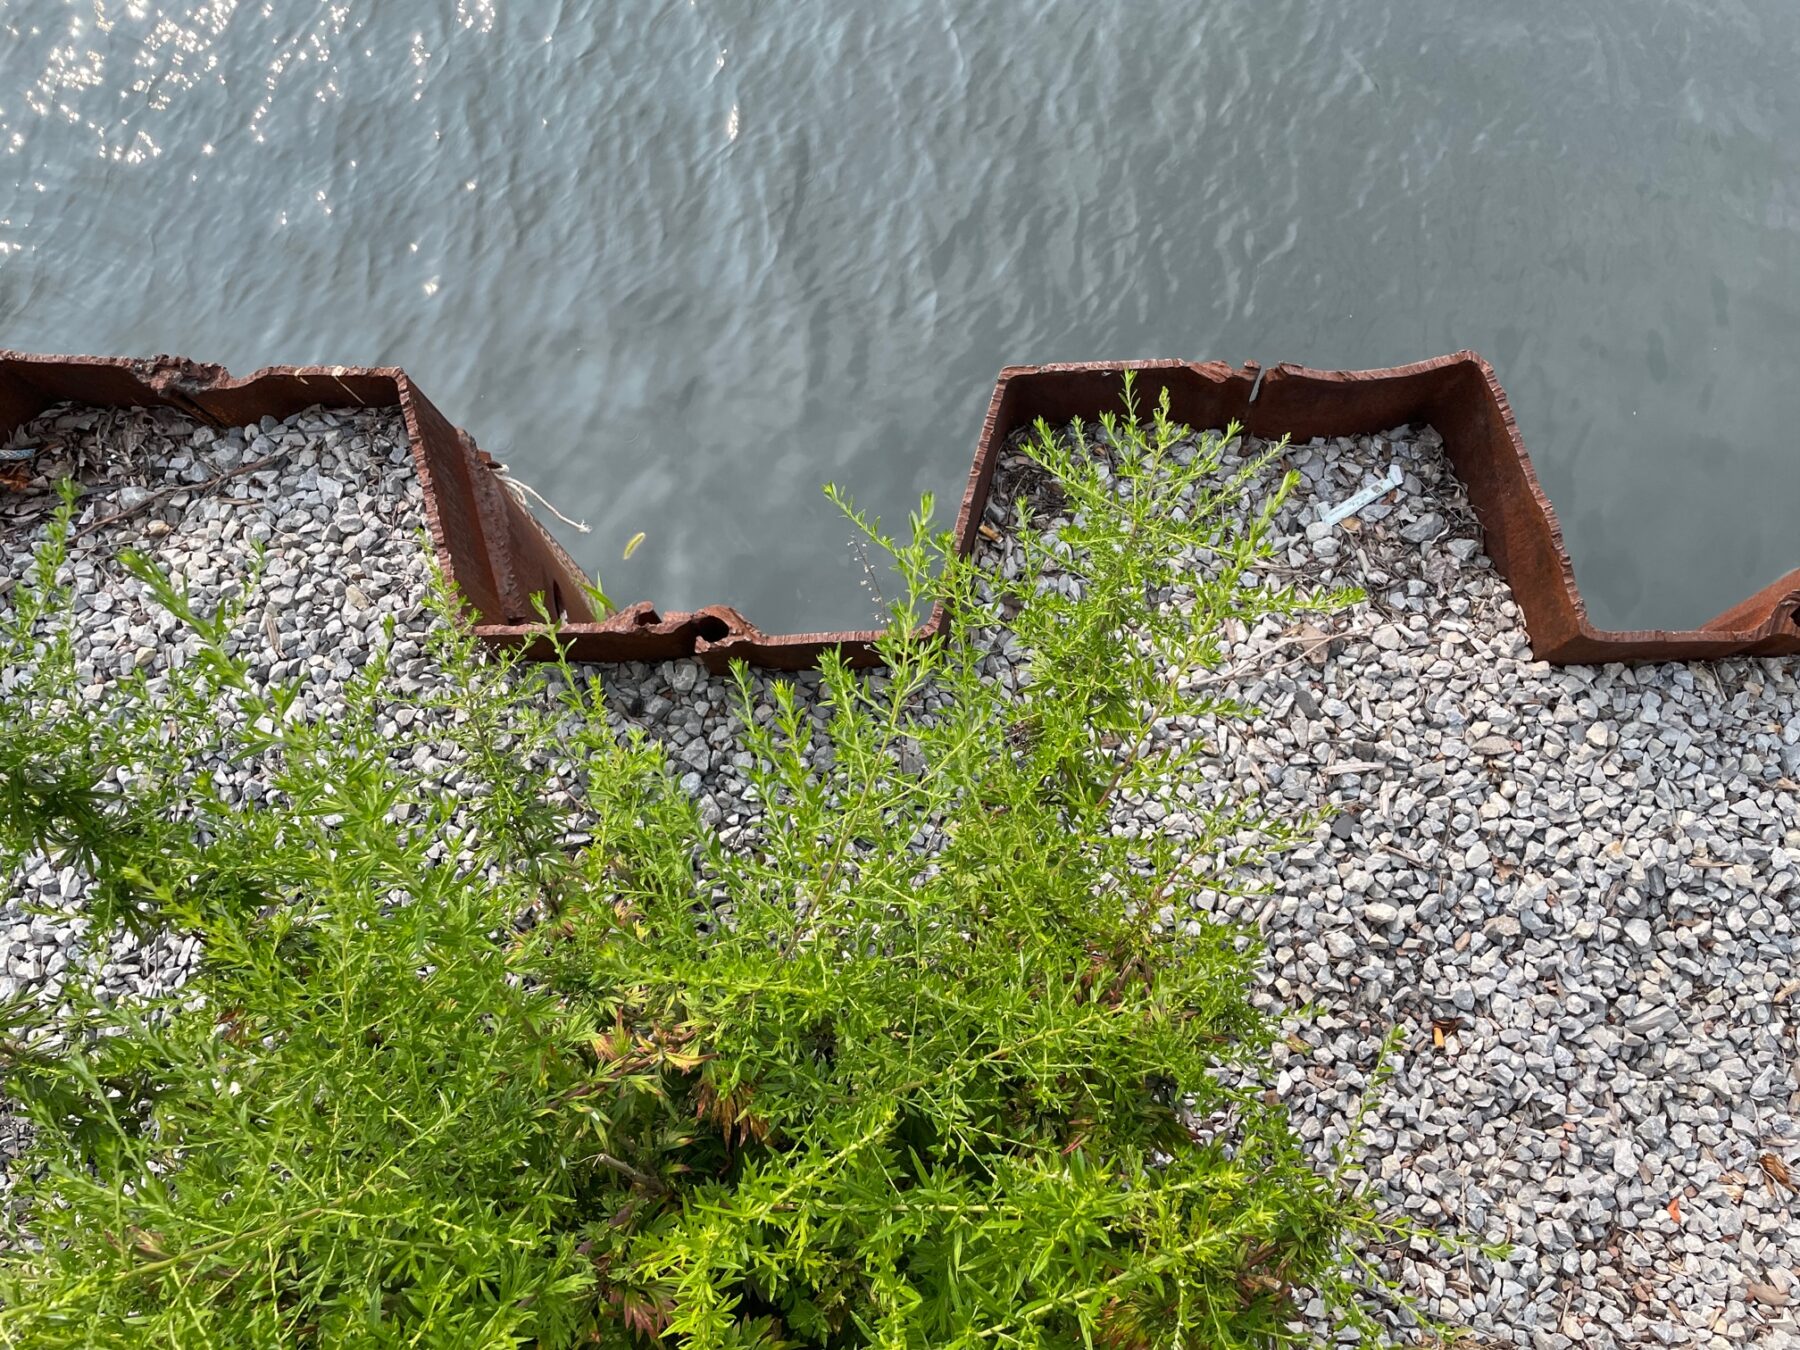 photo of water's edge, kept back by retaining wall, with low plants growing on shore